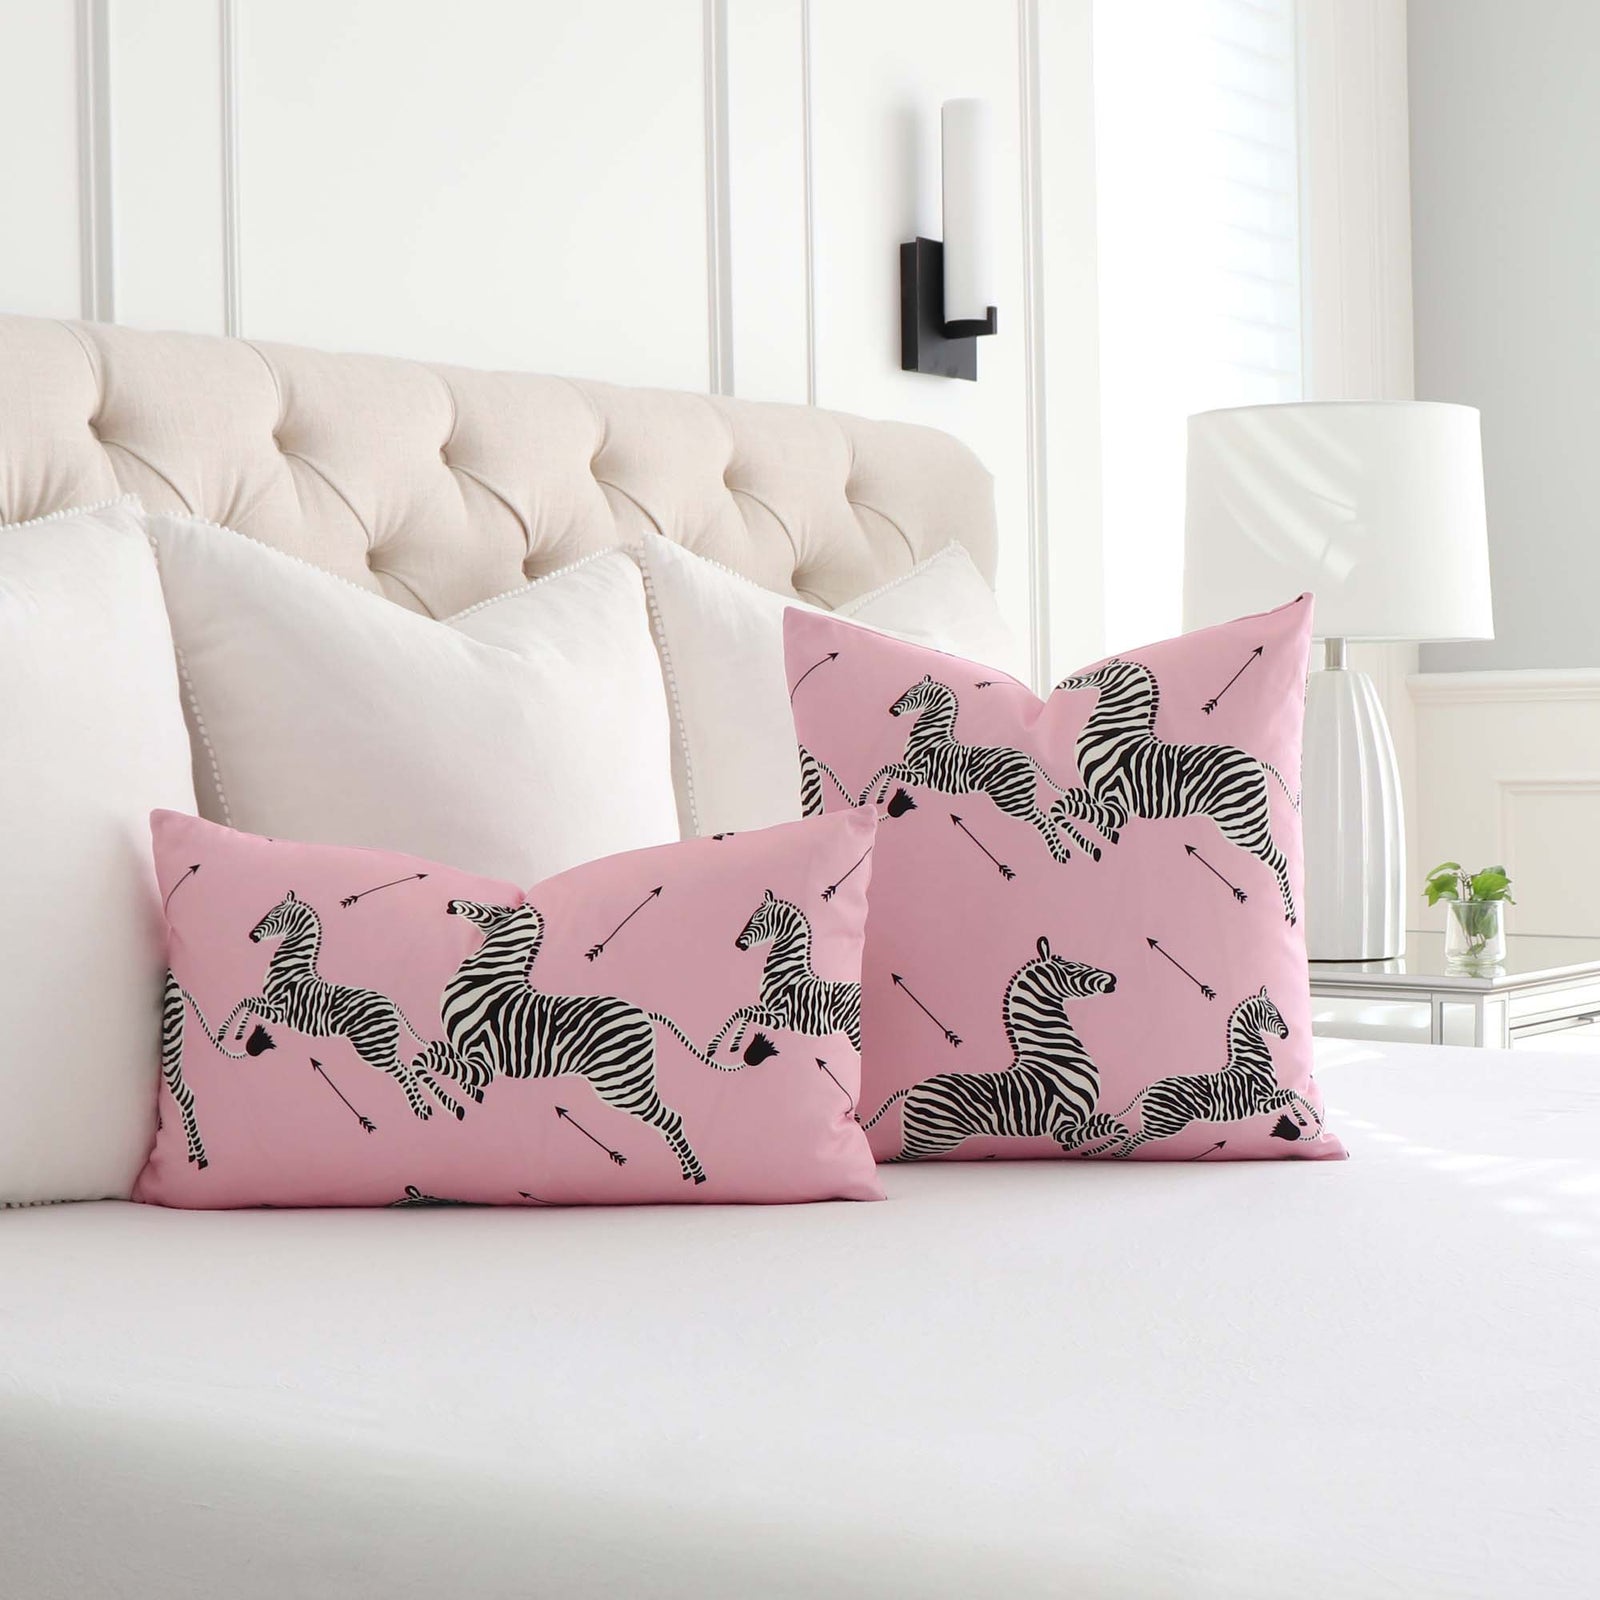 https://cdn.shopify.com/s/files/1/1116/9186/products/scalamandre-zebras-petite-peony-pink-SC000216641-designer-animal-print-throw-pillow-cover-in-bedroom_1600x.jpg?v=1675902538